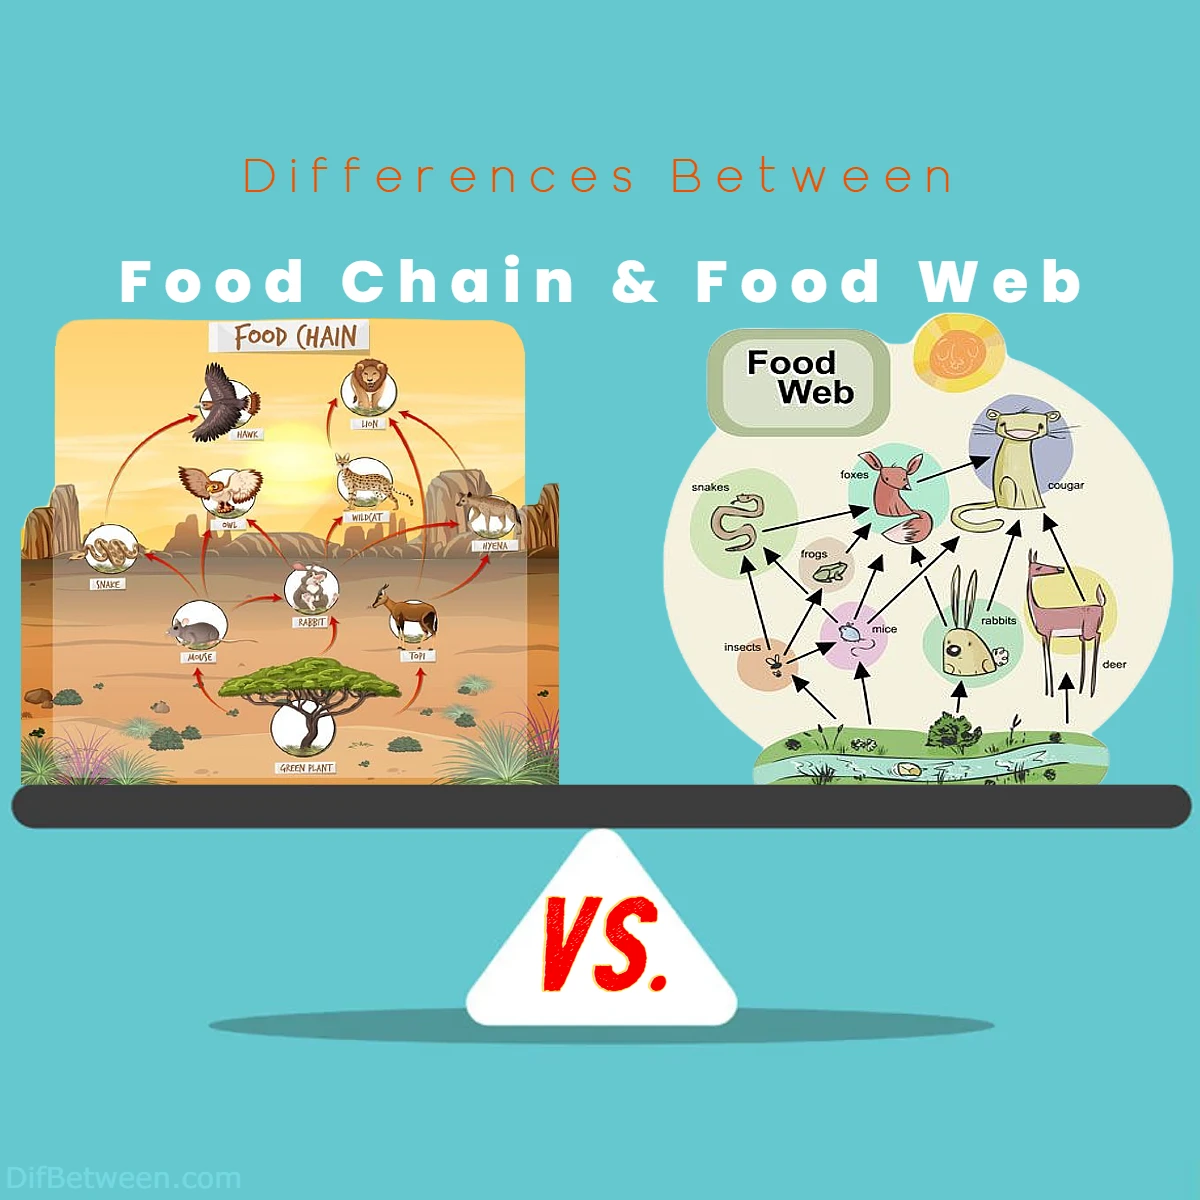 Differences Between Food Chain vs Food Web